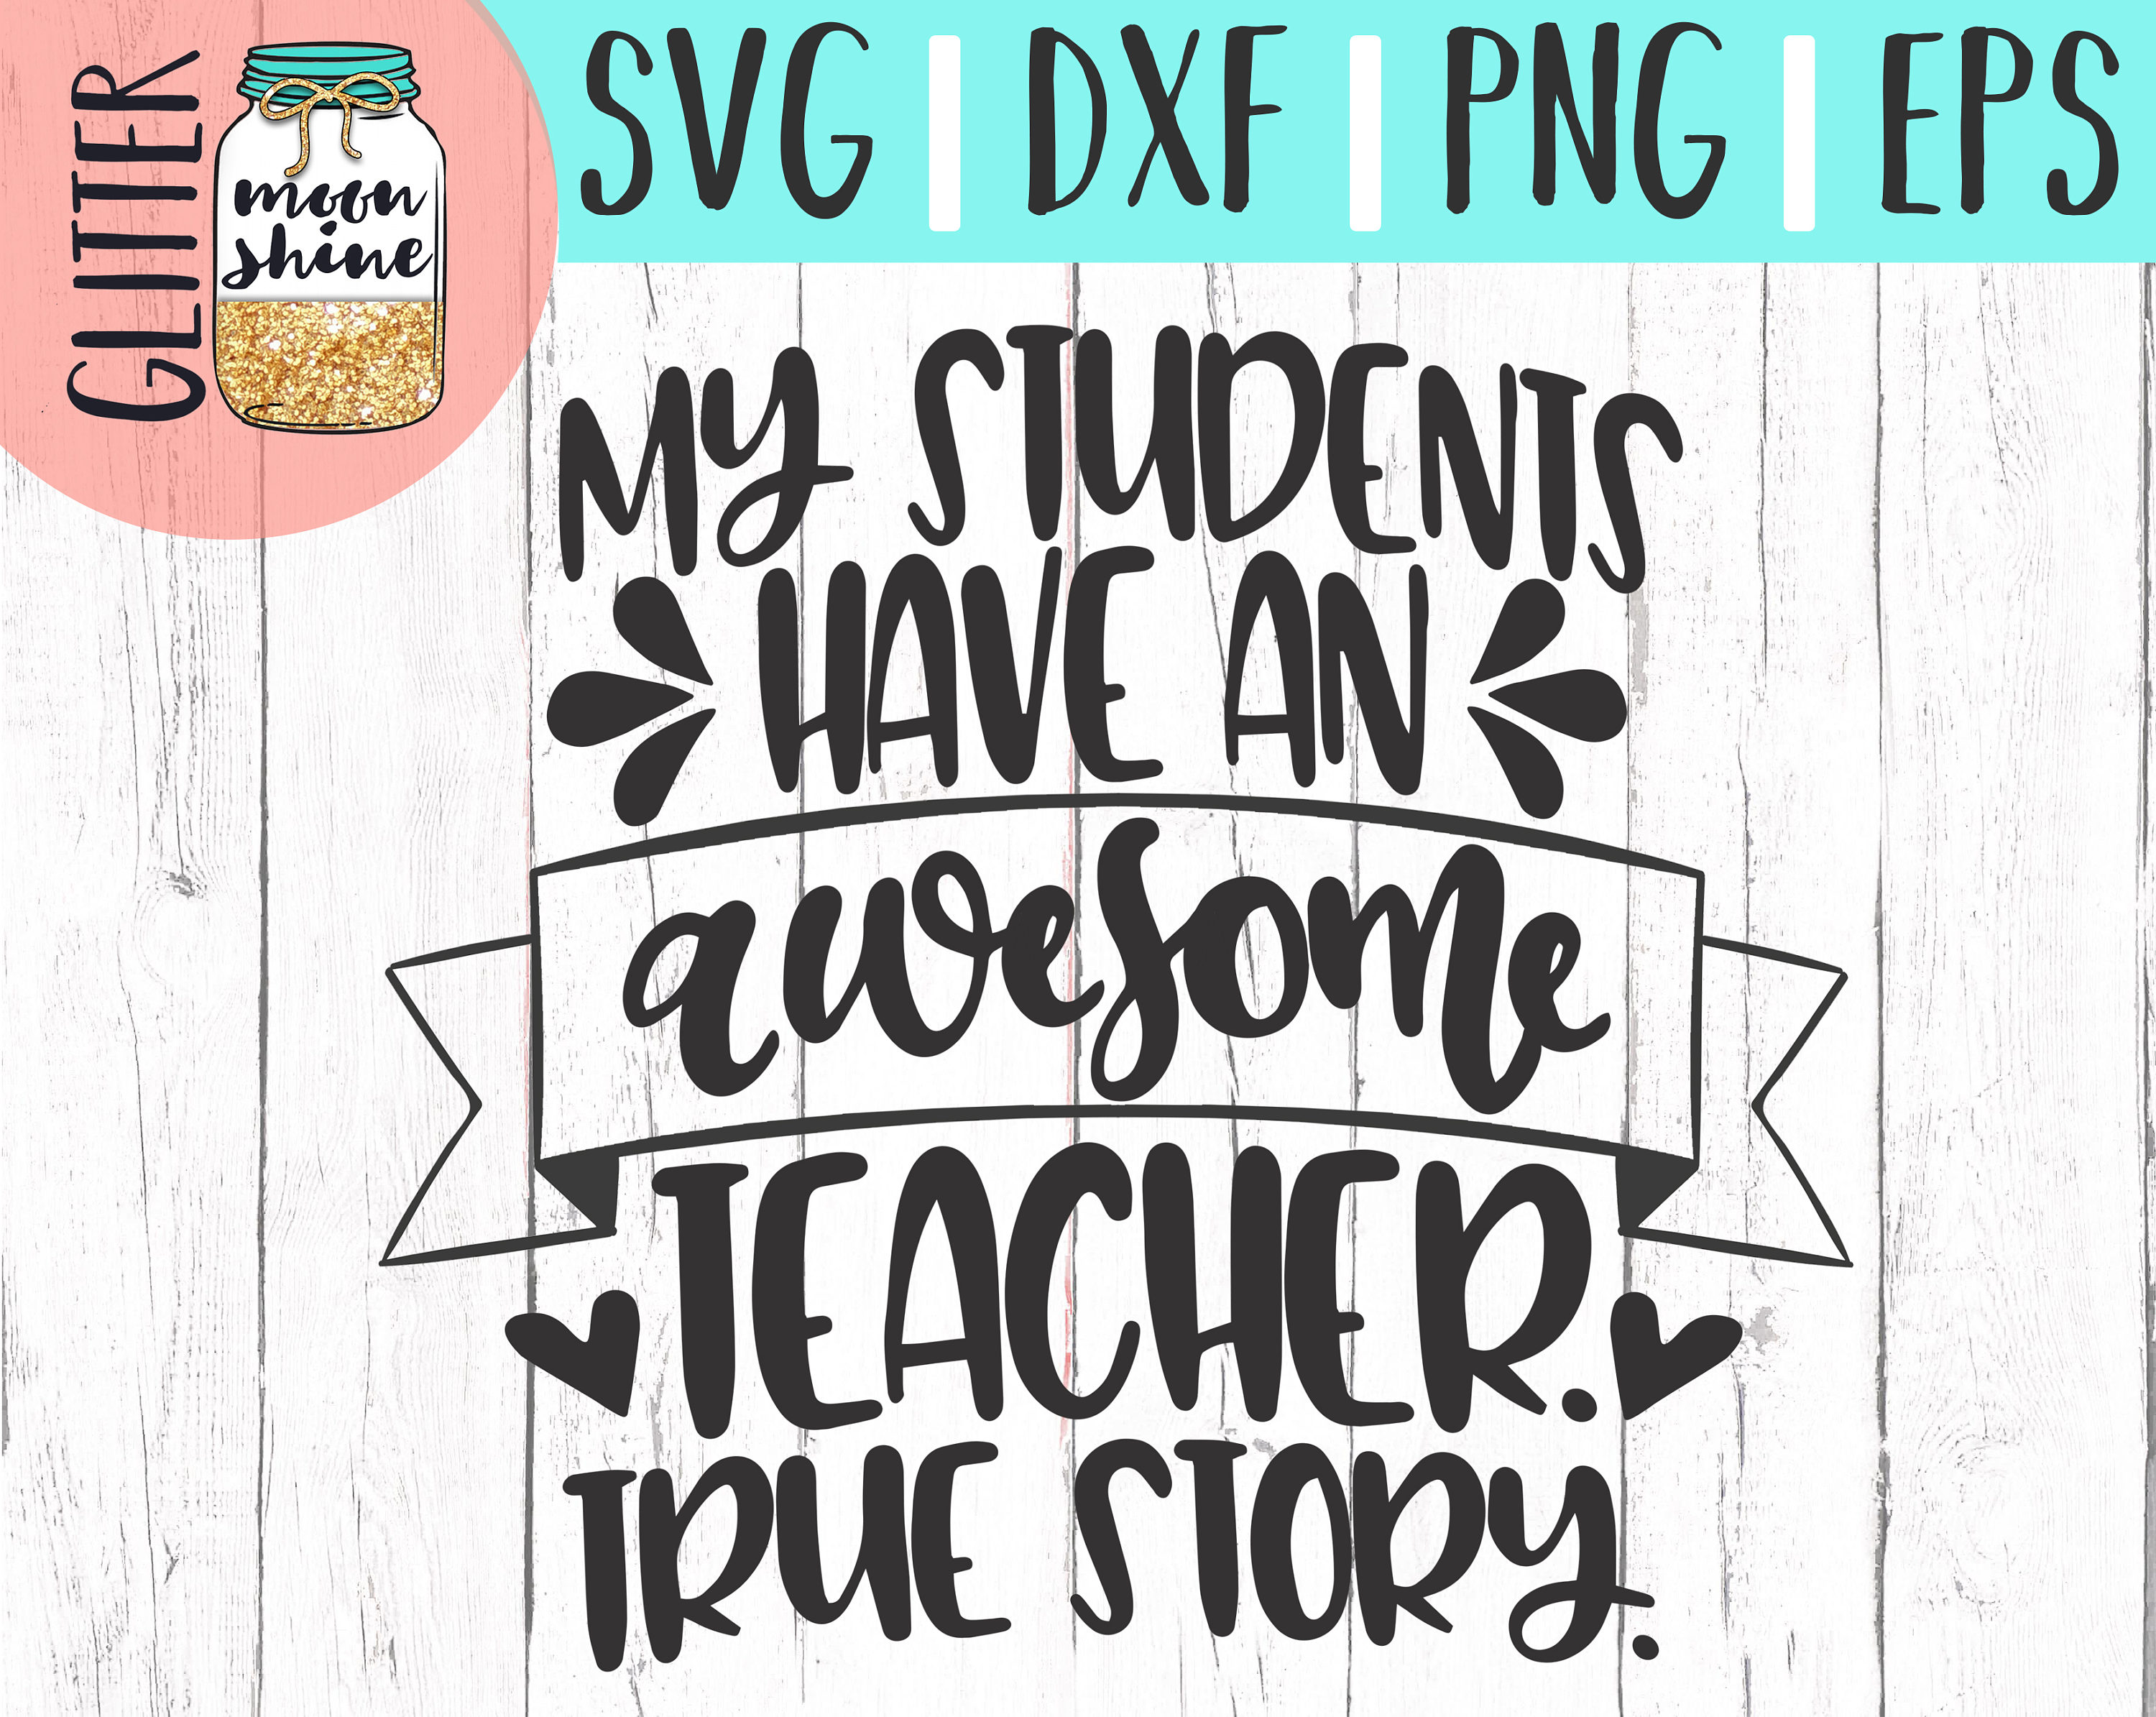 Download My Students Have An Awesome Teacher svg eps dxf png cutting